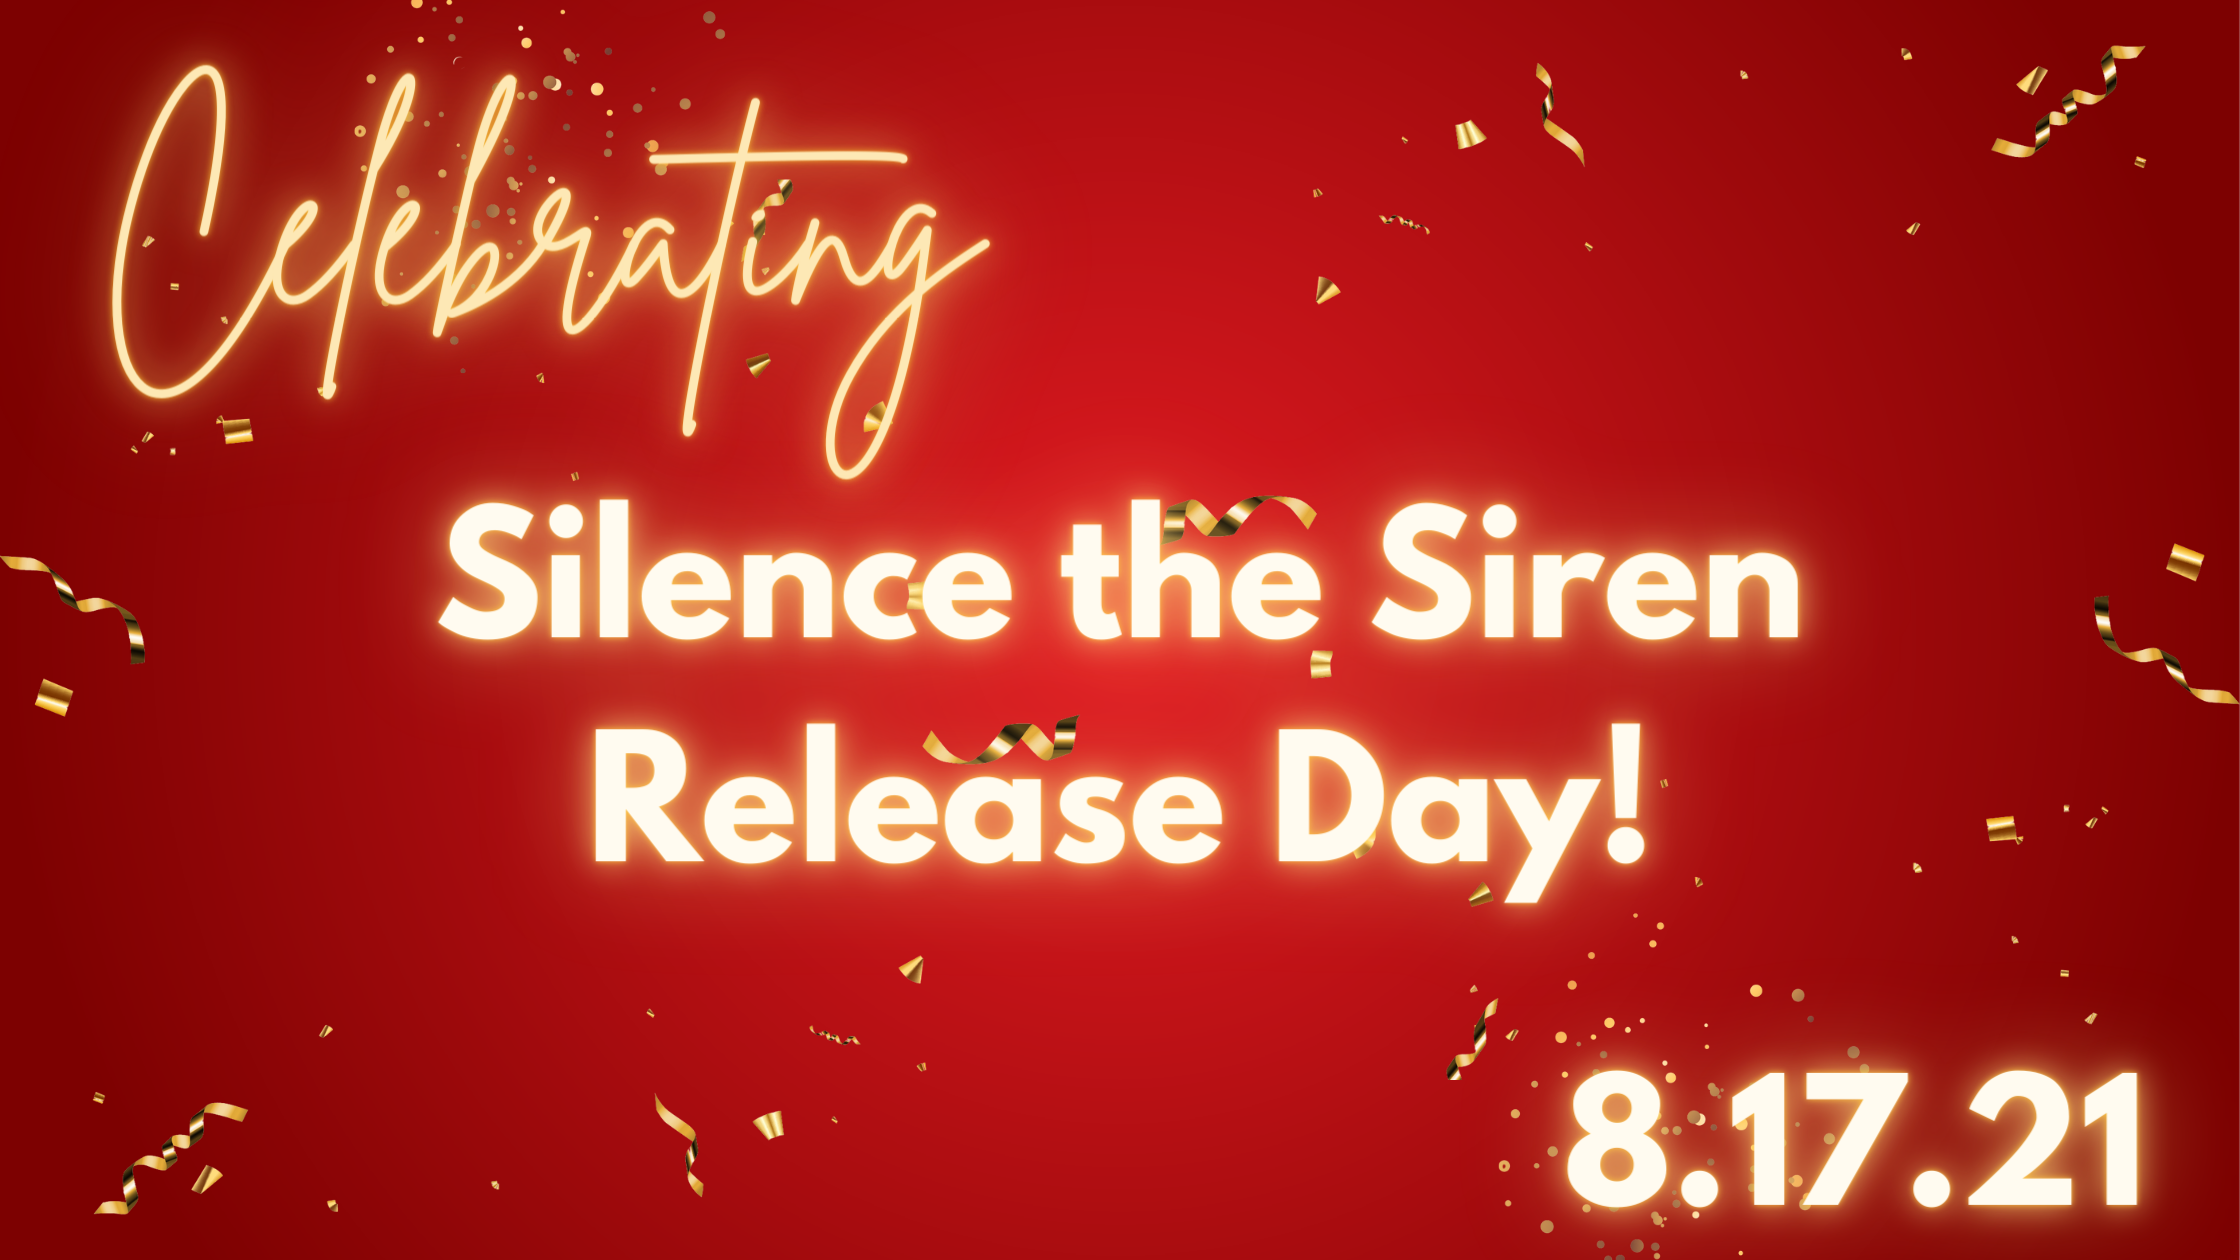 Silence the Siren Release Day!